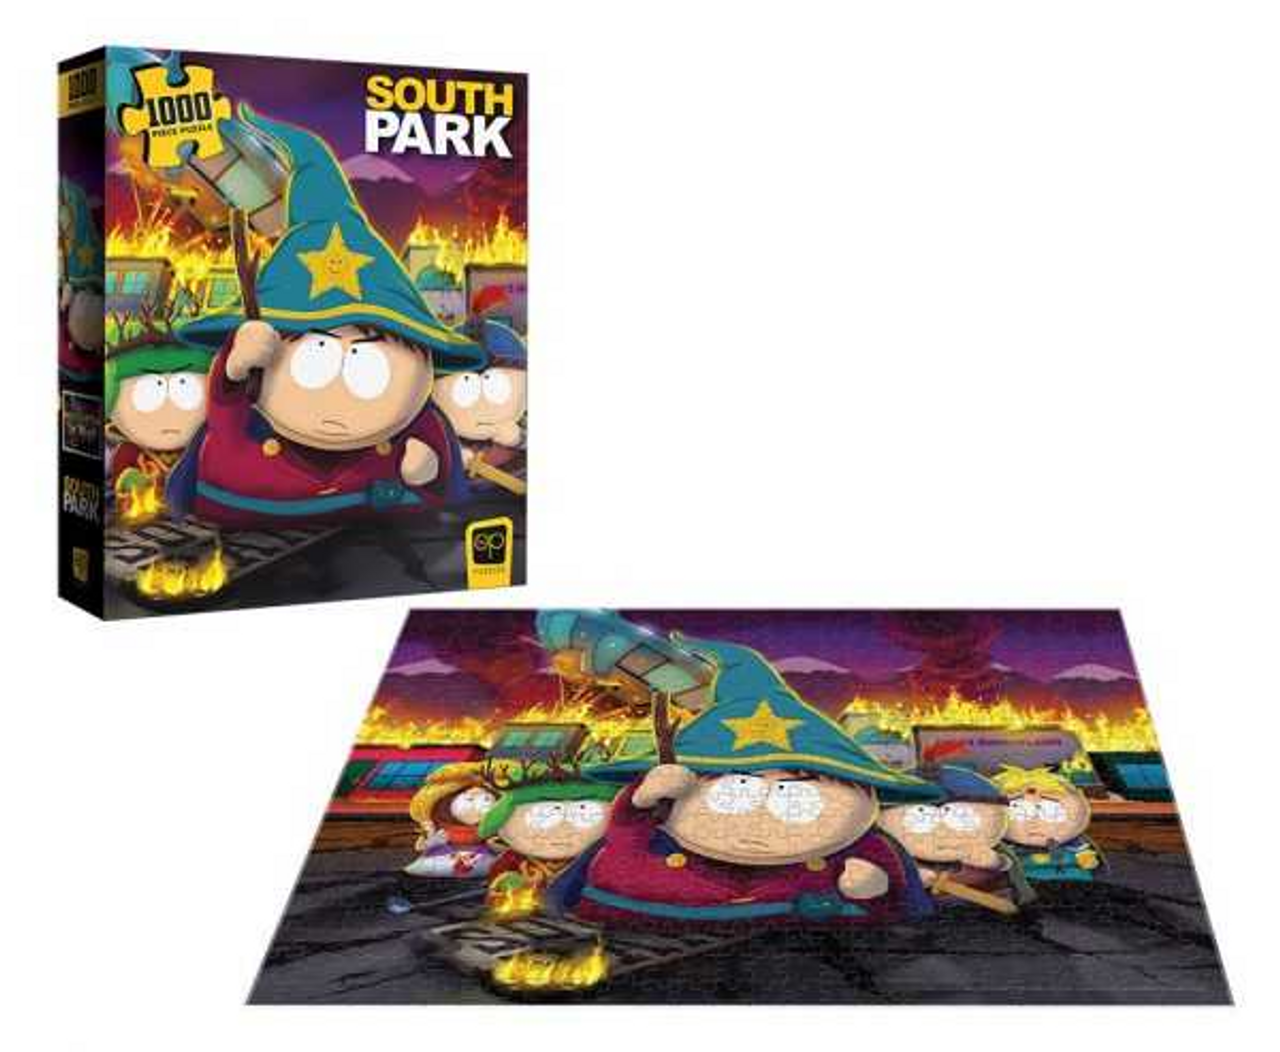 South Park "The Stick of Truth" 1000 Piece Puzzle